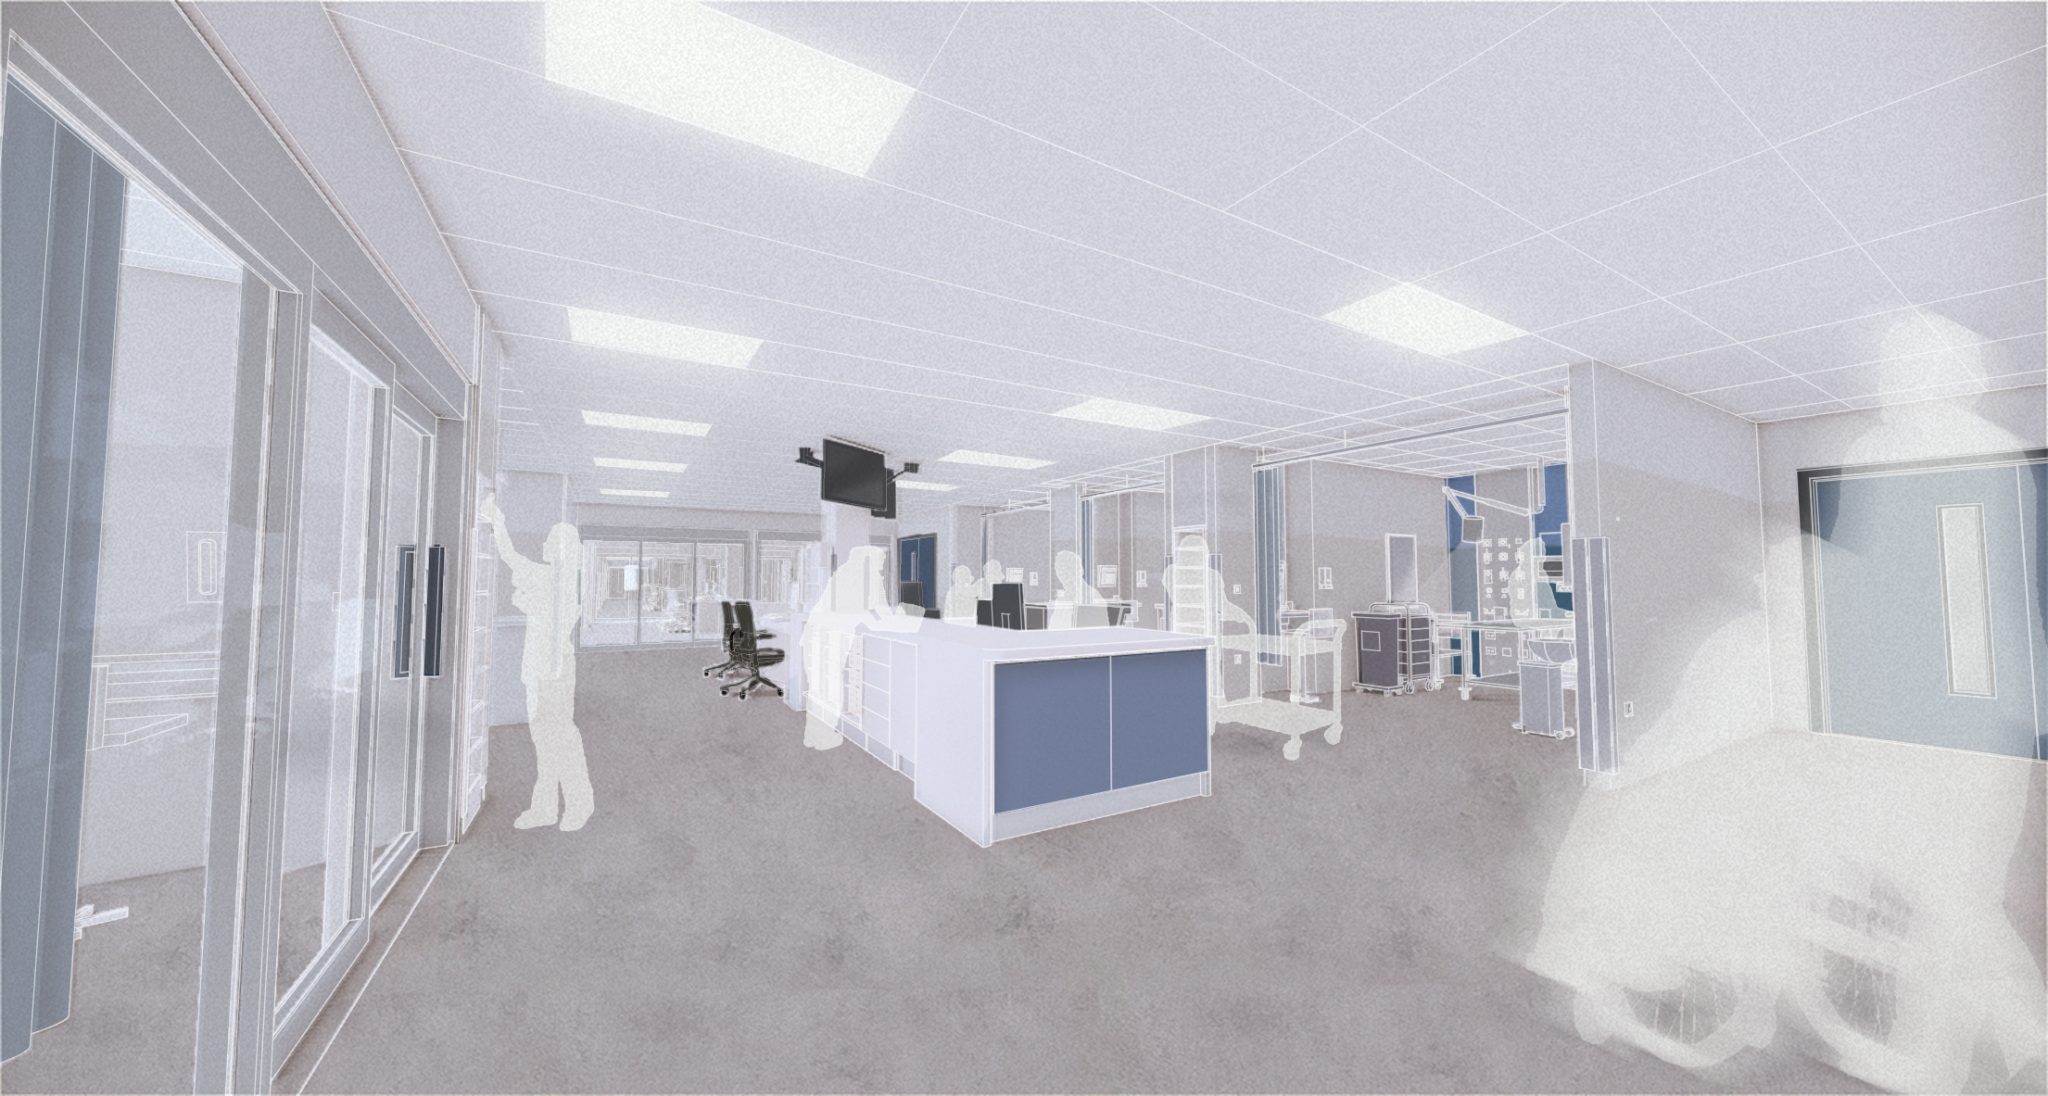 Artist's impression of inside the new Emergency Department